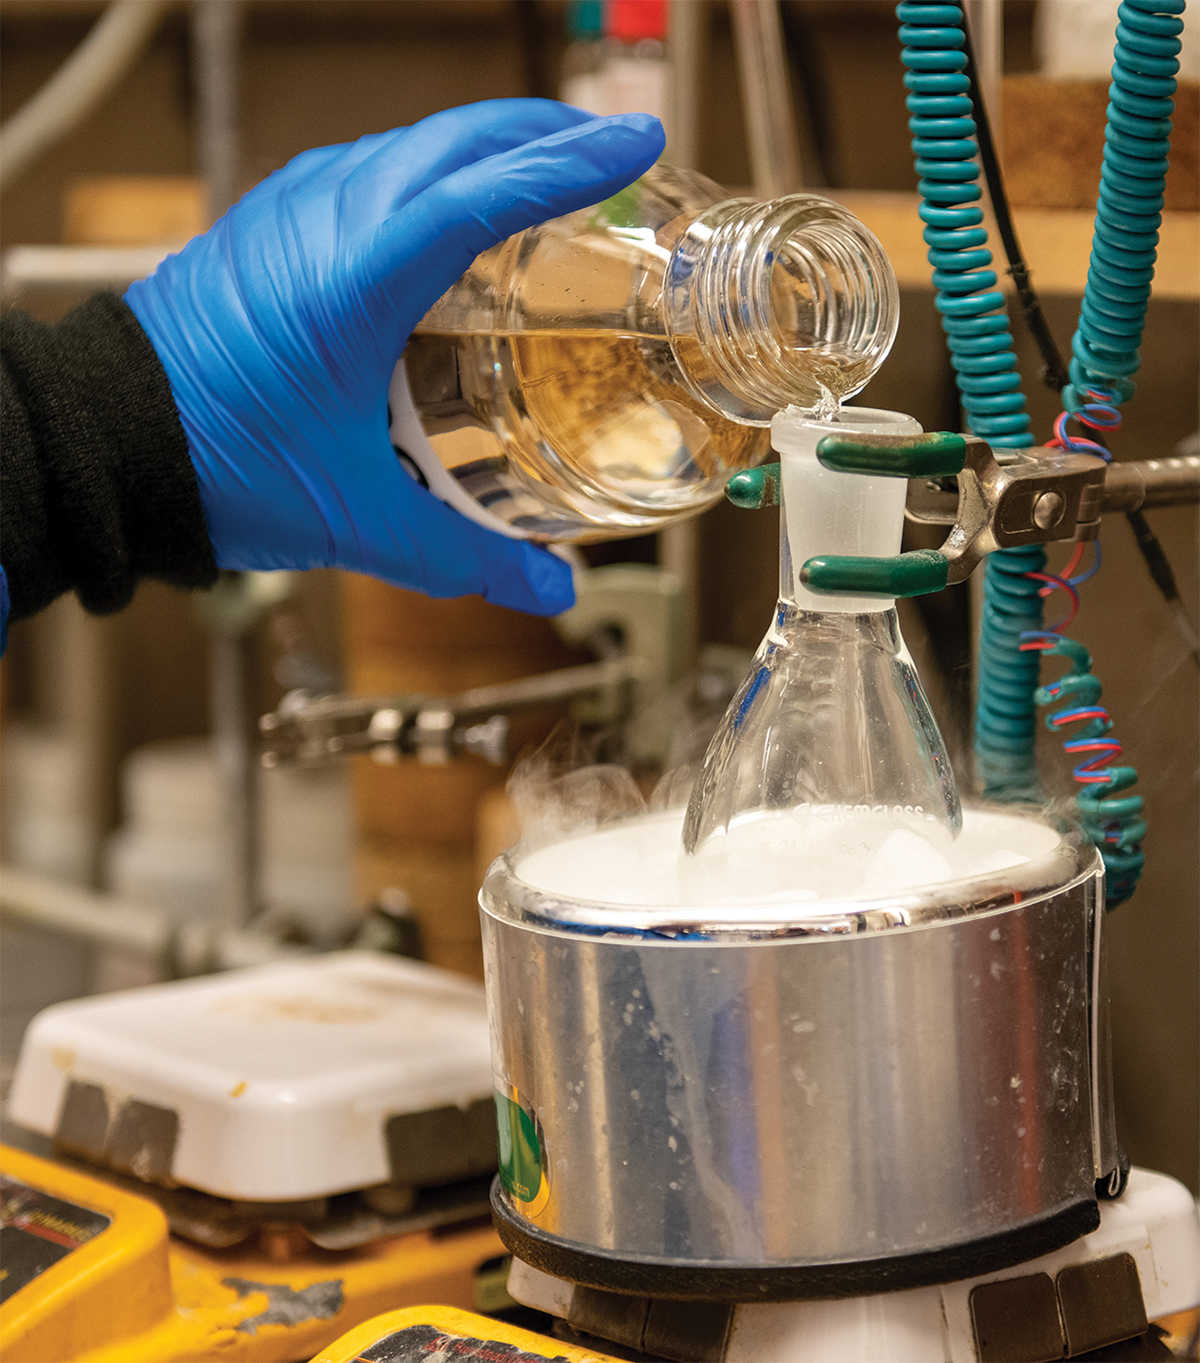 blue-gloved hand pouring chemical into heated beaker